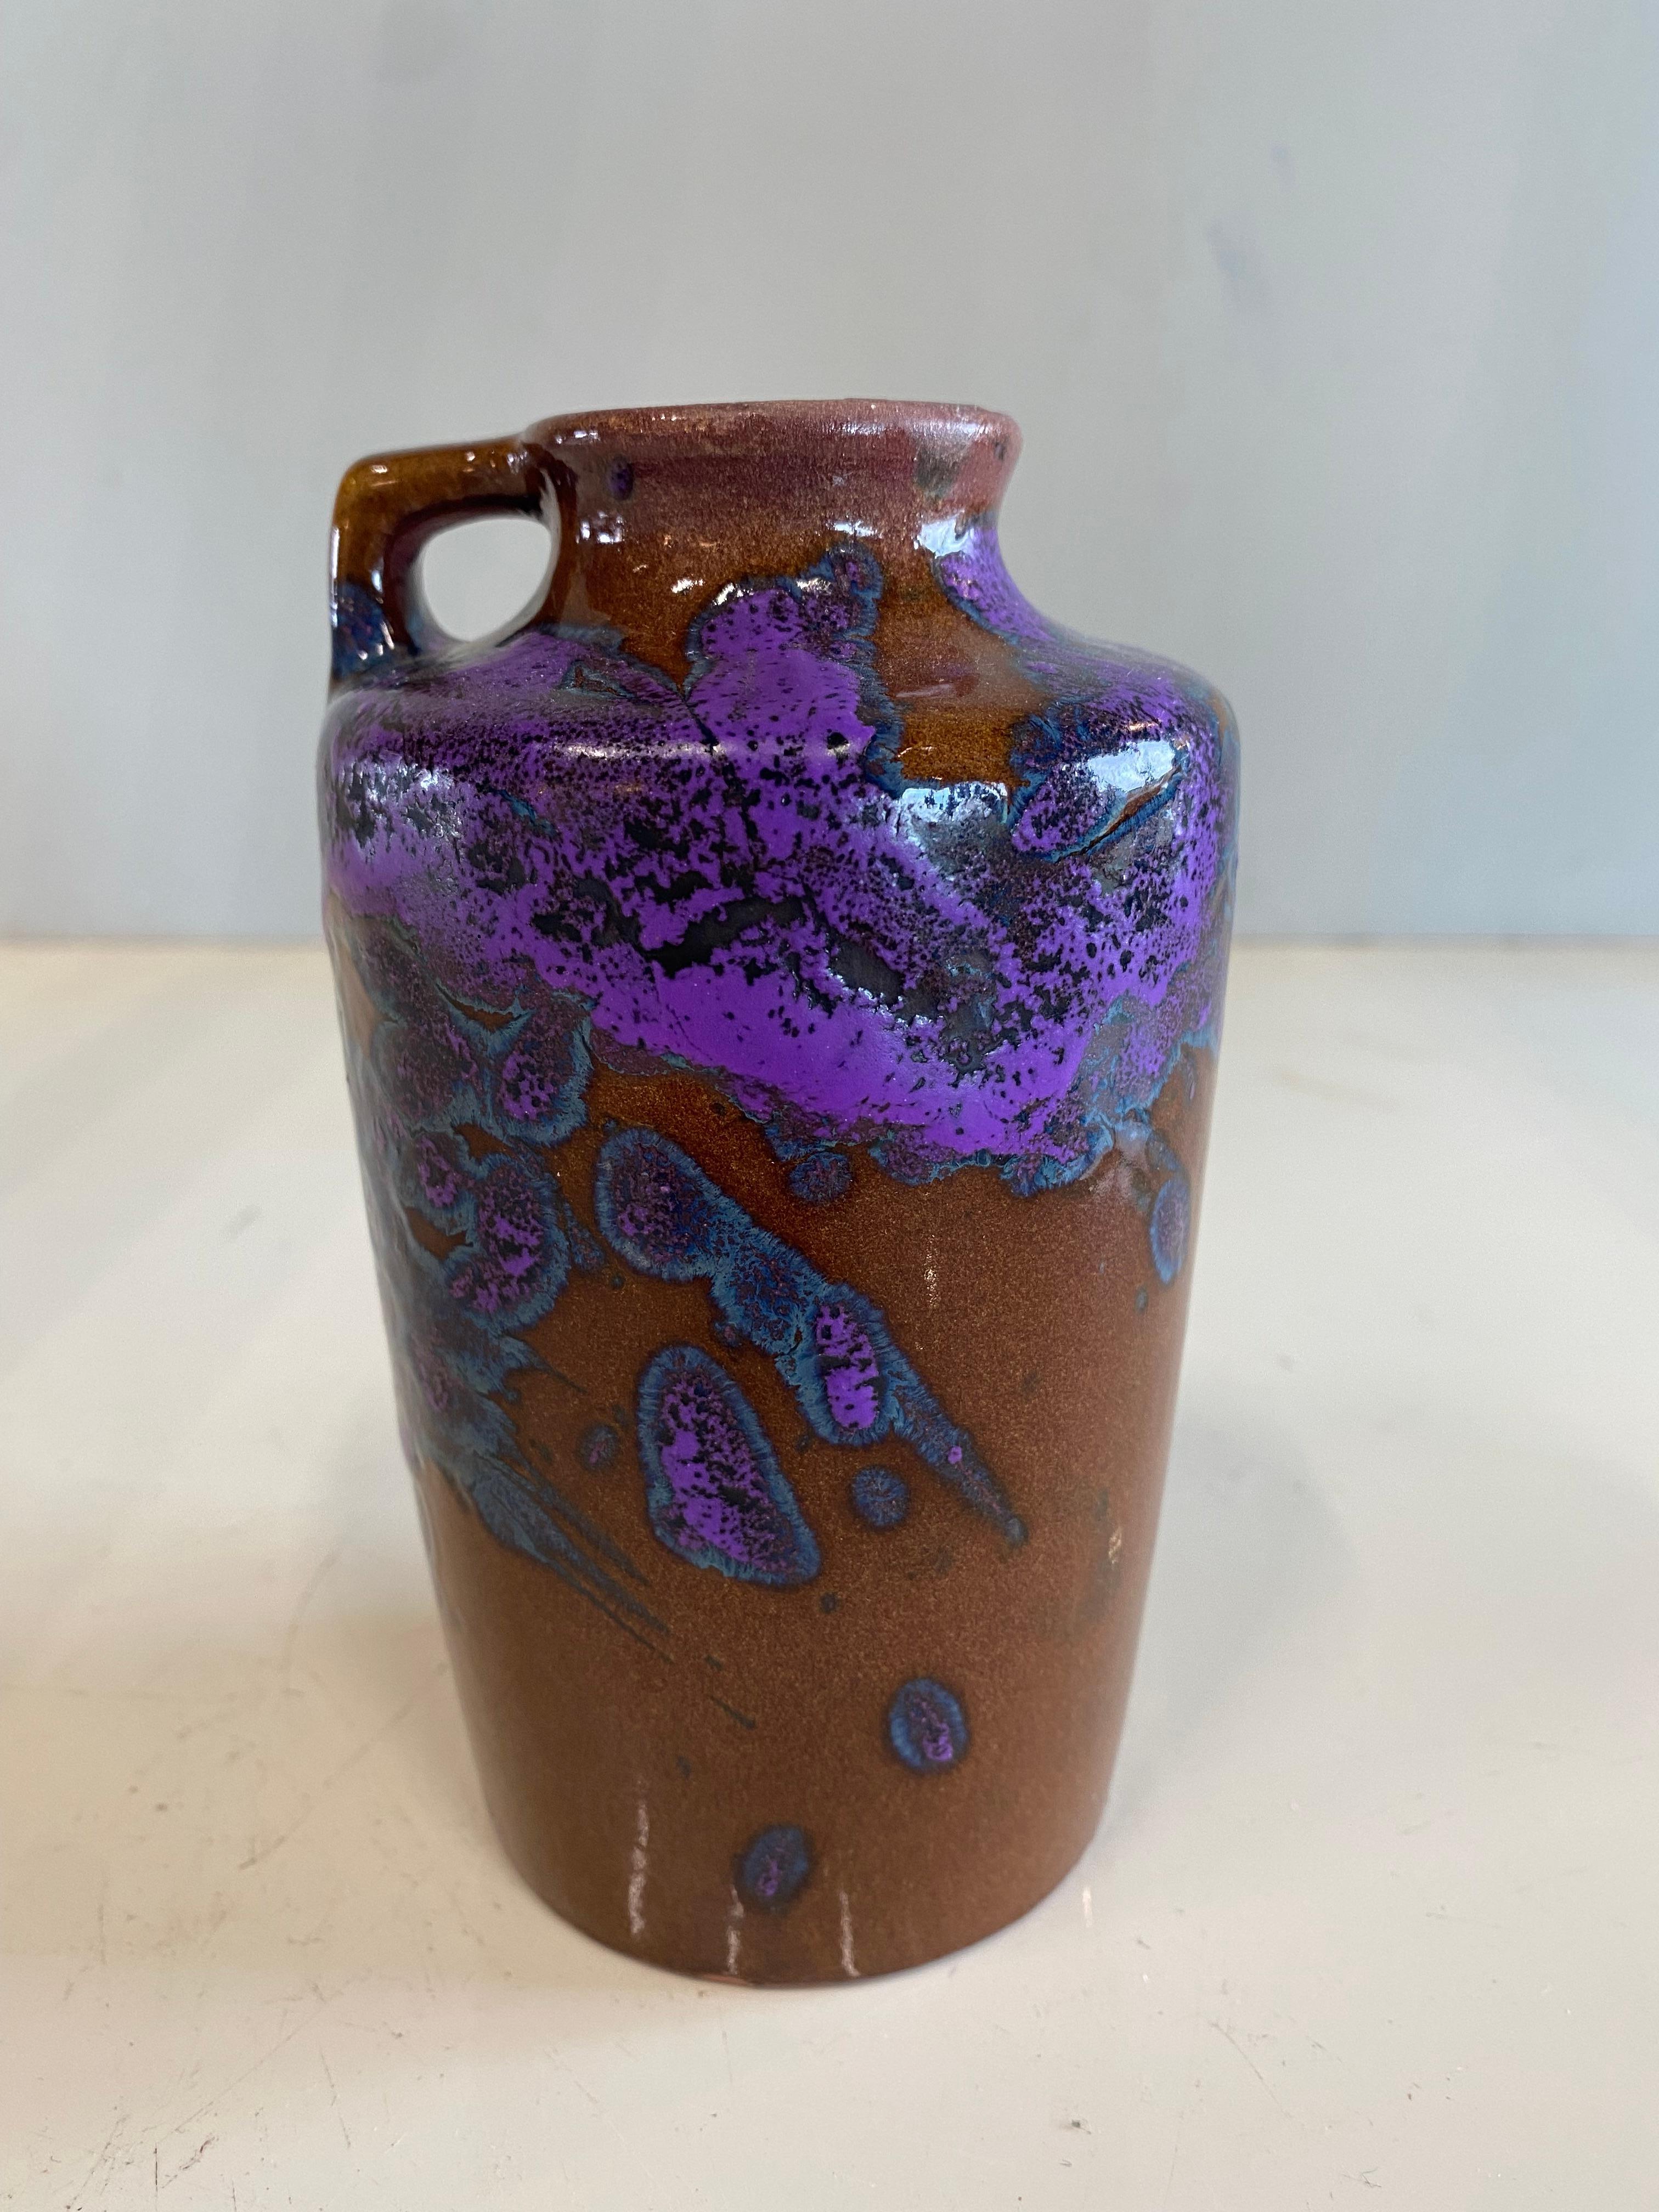 This small ceramic vase by Scheurrich could also be an Art Nouveau piece in terms of shape and colour. Nevertheless it is a mid century piece. 
The color speckles look less like ink blobs in water. The play of colors between the strong purple and